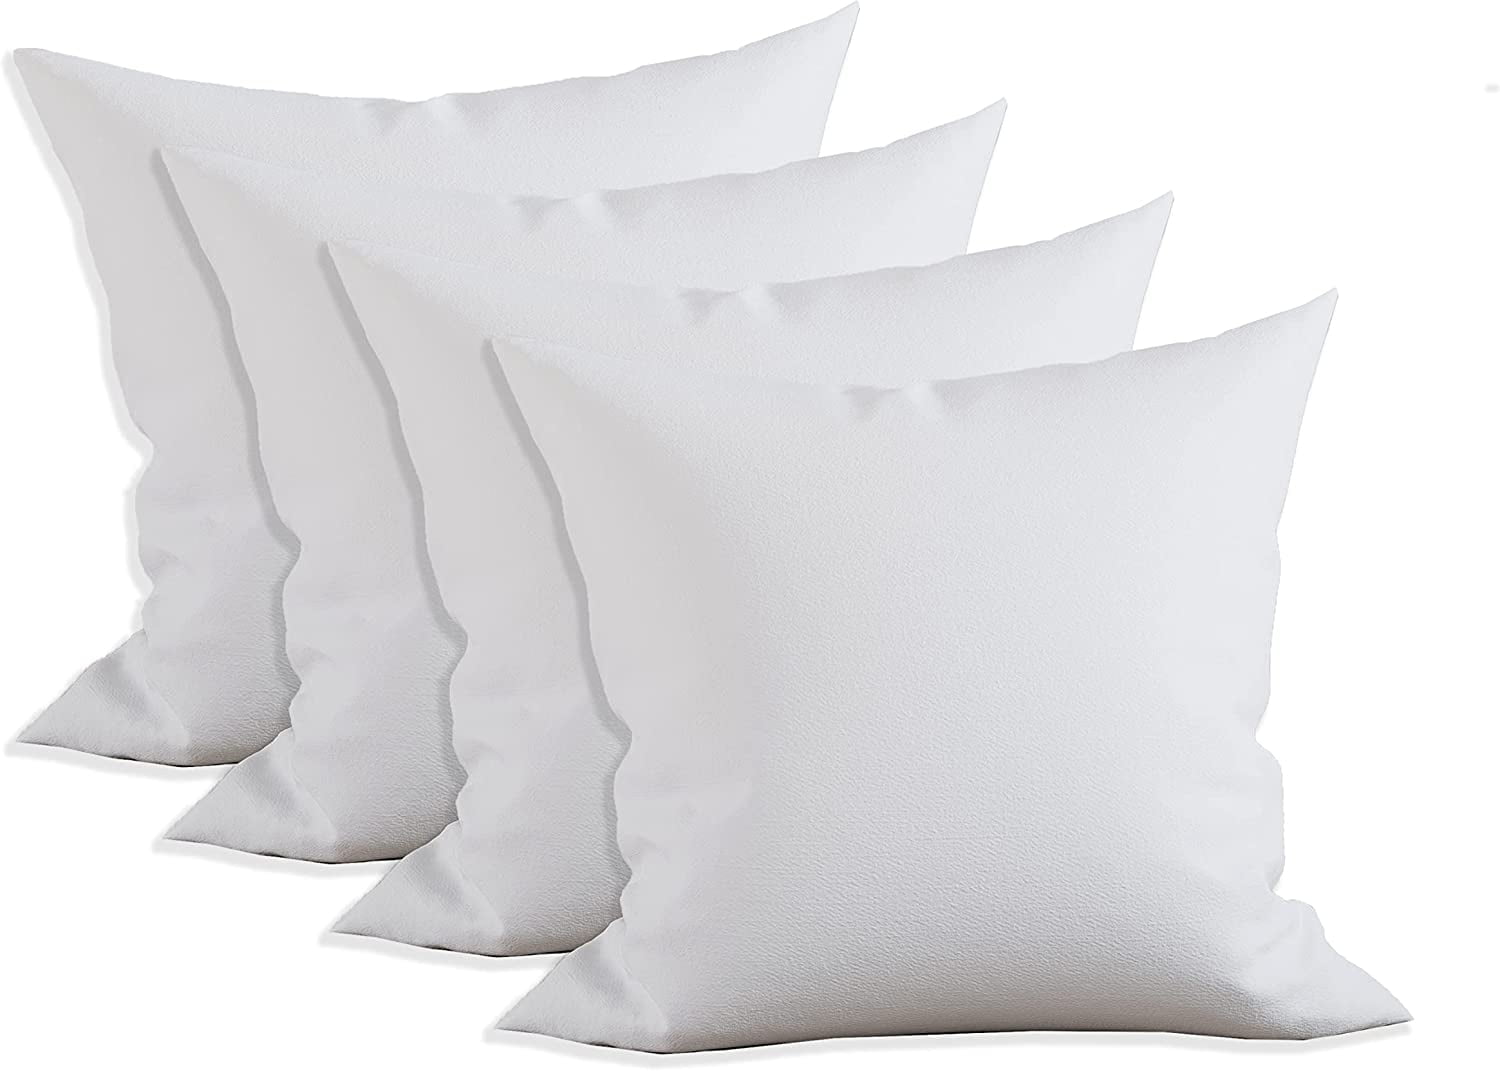 Nestl Throw Pillow Inserts Square Pillow Cushion, Decorative Pillow Insert, 24 inch x 24 inch, Pack of 4, Size: 24 x 24, White